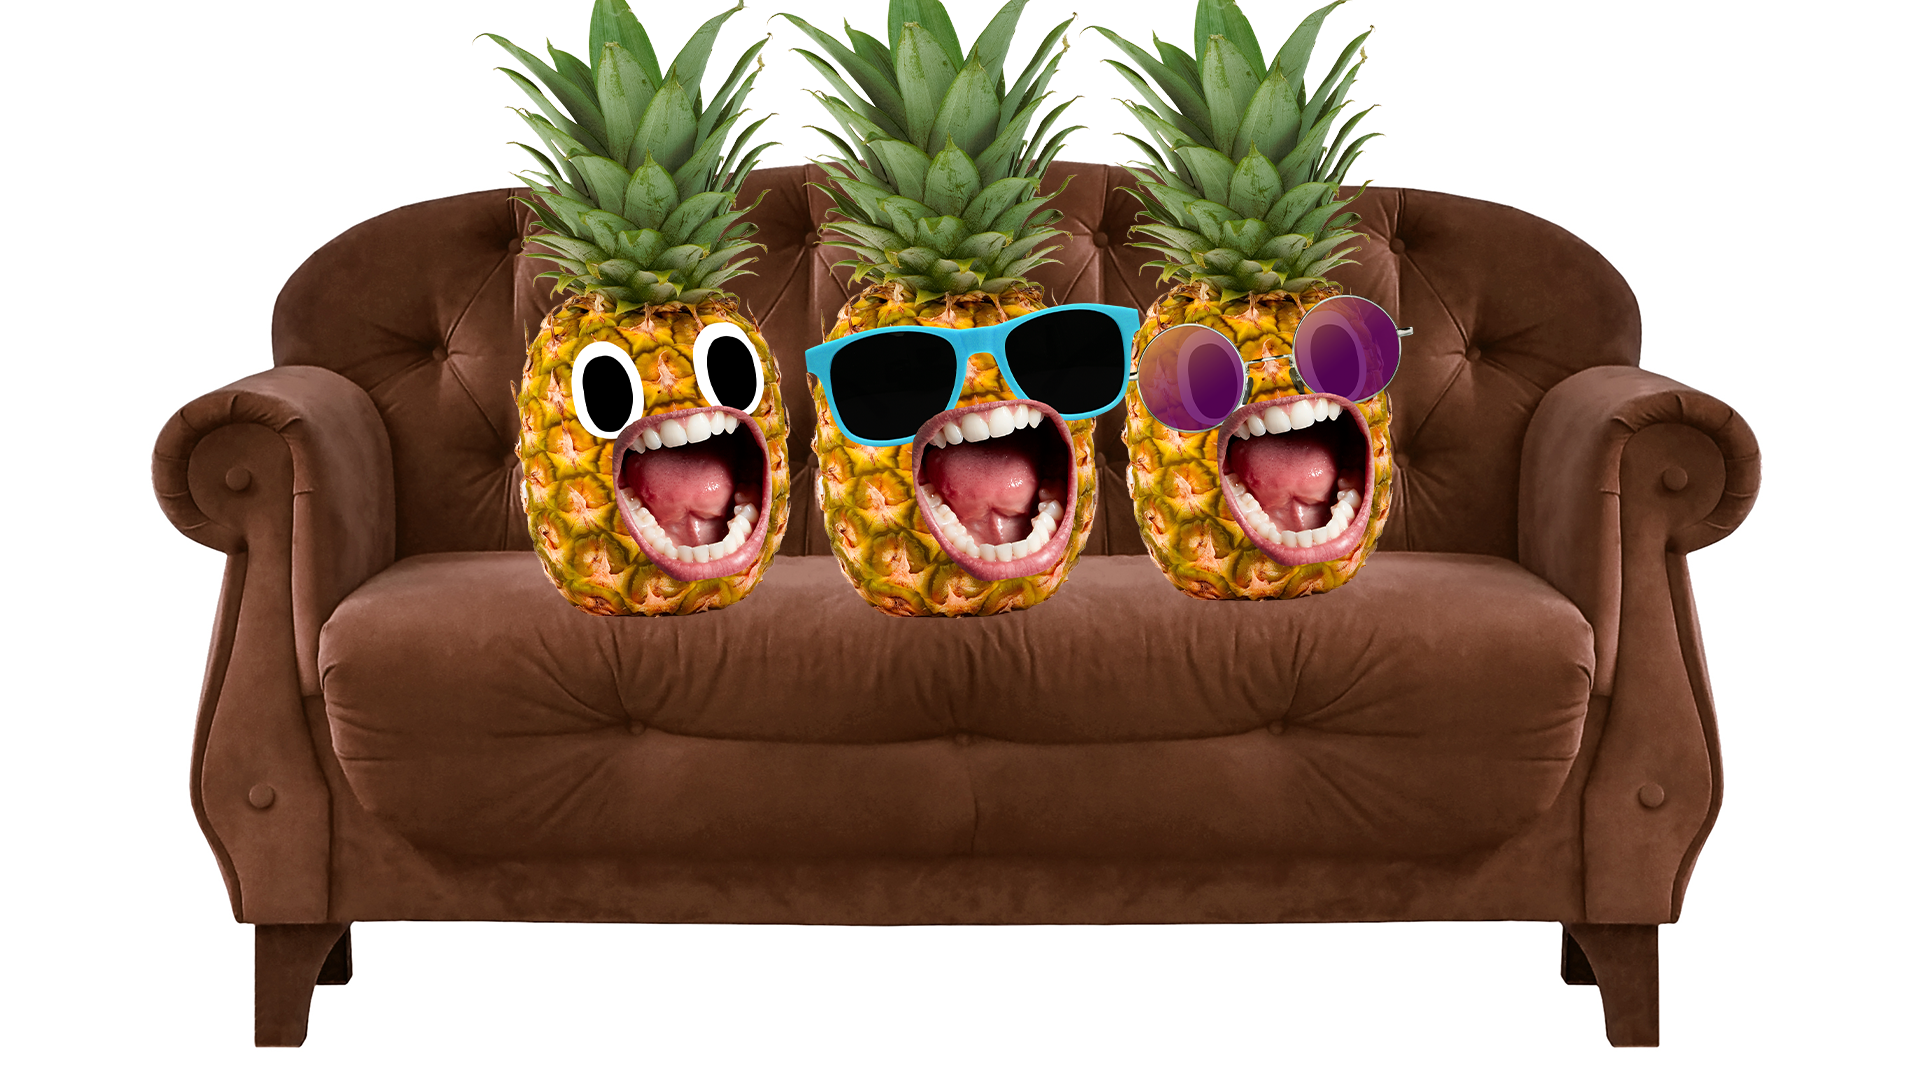 Beano pineapples sitting on a couch